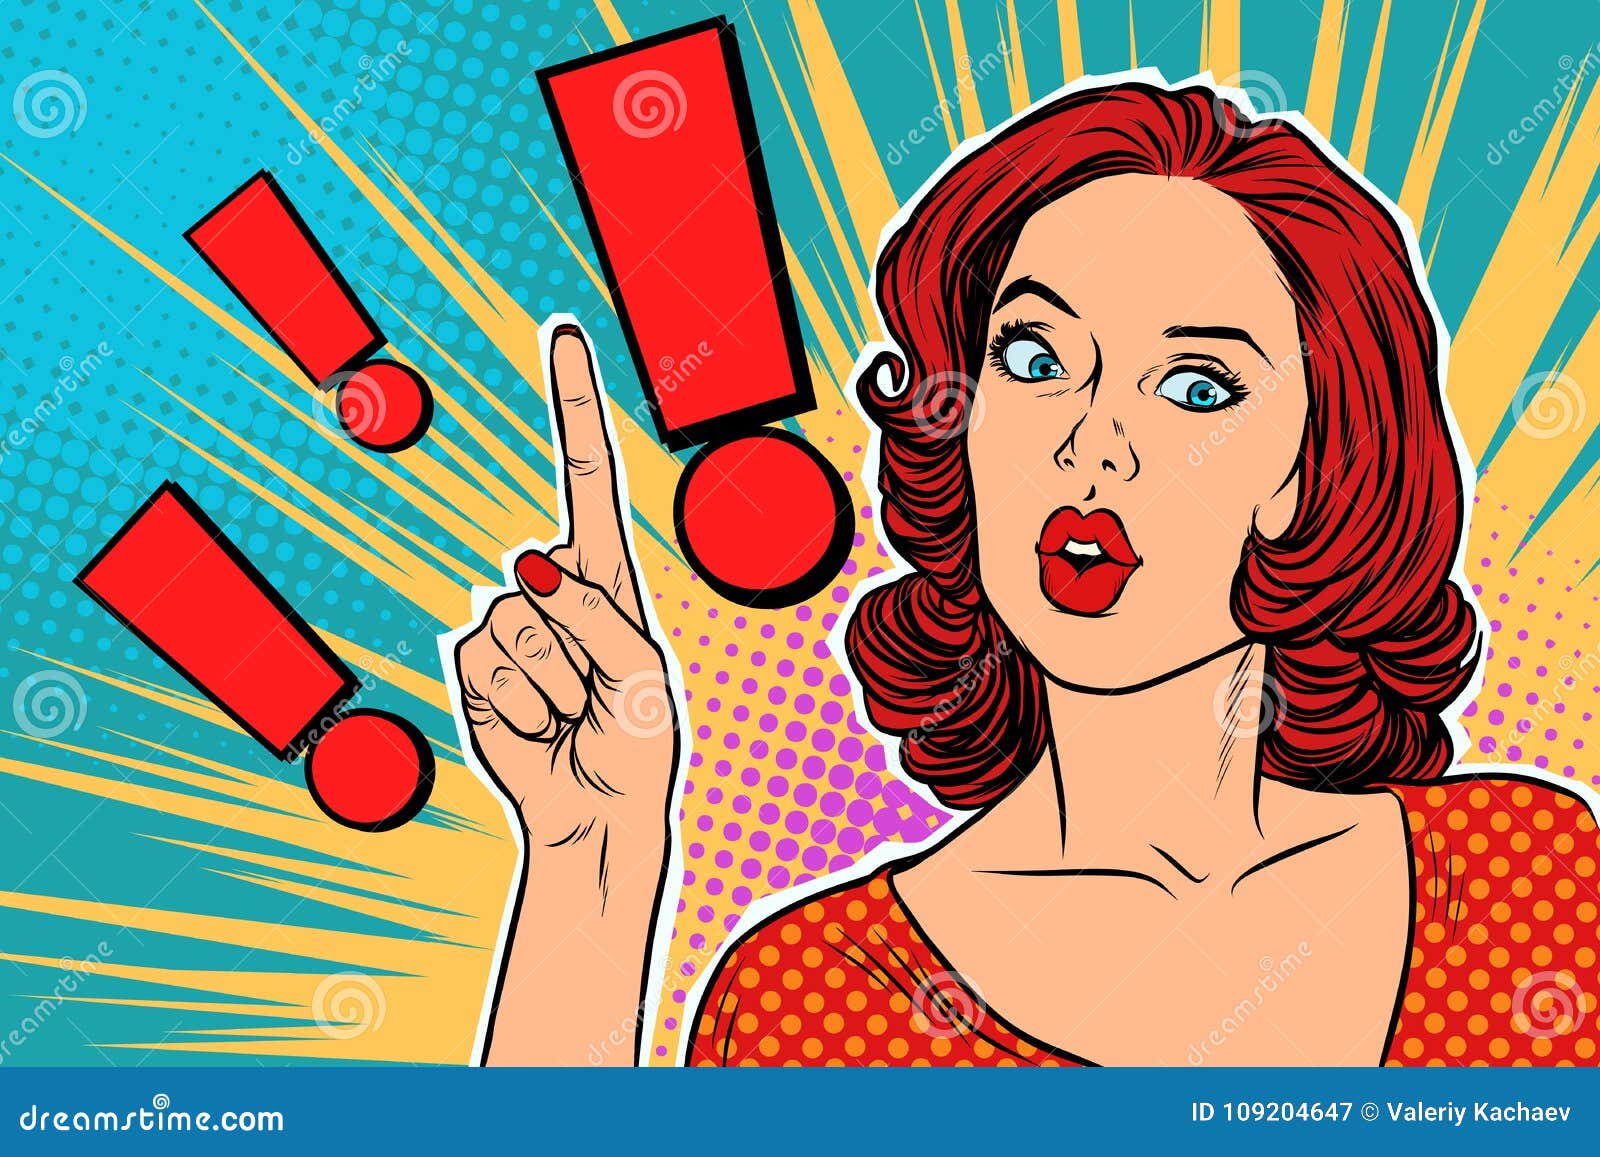 exclamation-point-surprised-pop-art-woman-exclamation-point-surprised-pop-art-woman-pop-art-retro-vector-illustration-109204647.jpg